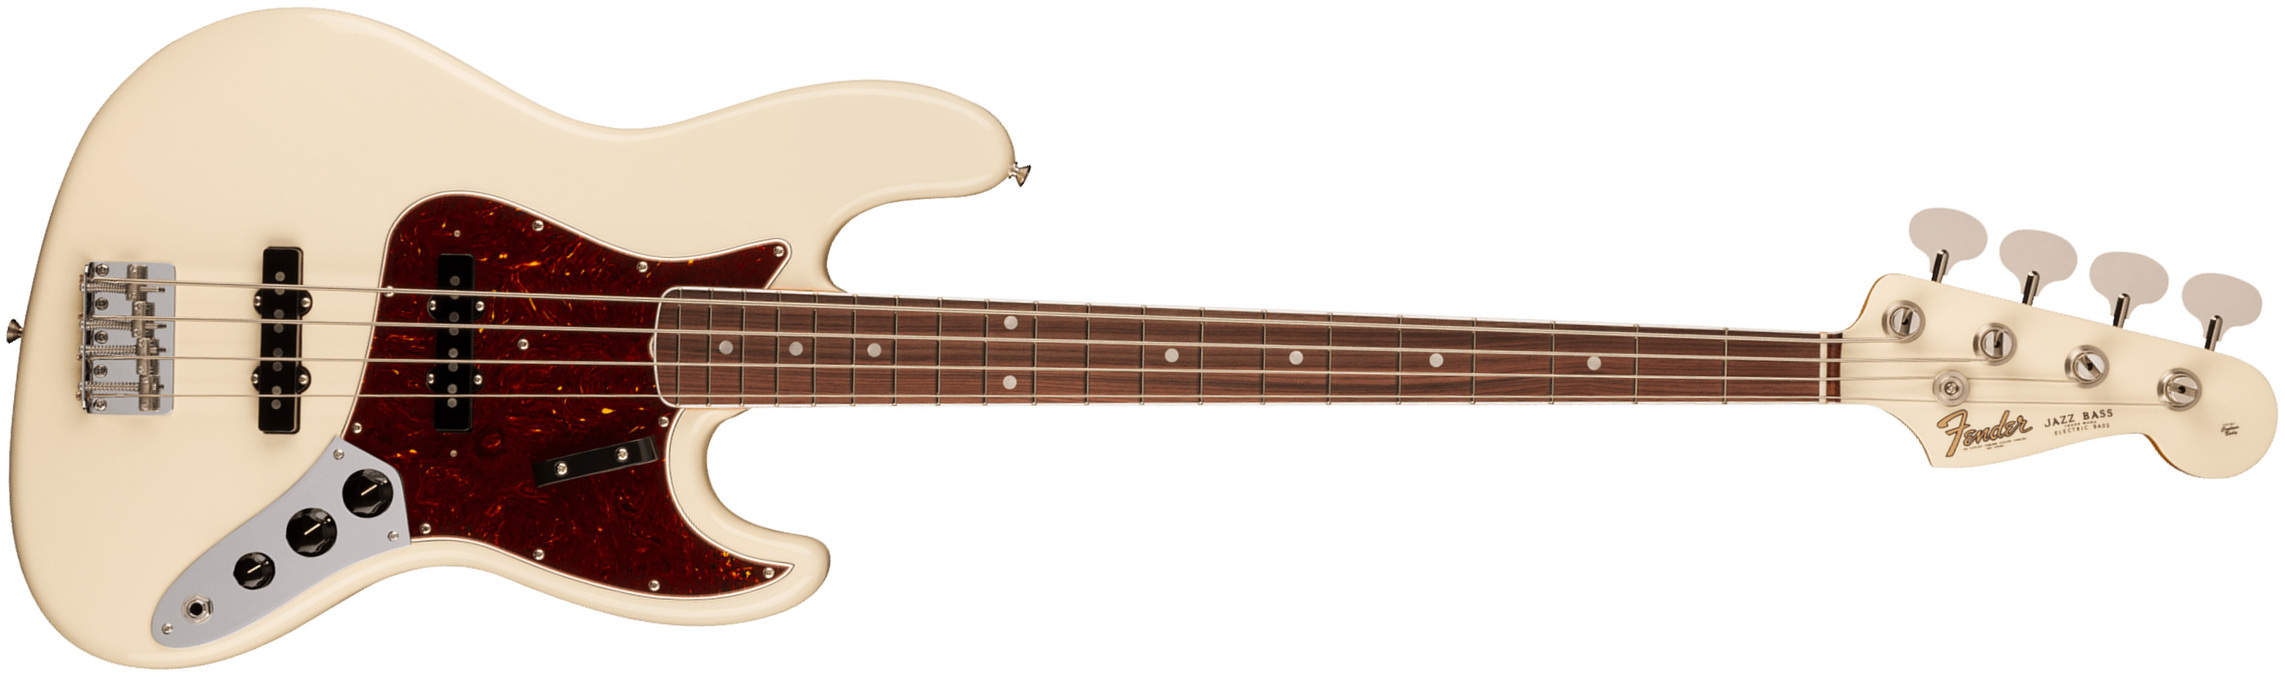 Fender Jazz Bass 1966 American Vintage Ii Usa Rw - Olympic White - Solidbody E-bass - Main picture